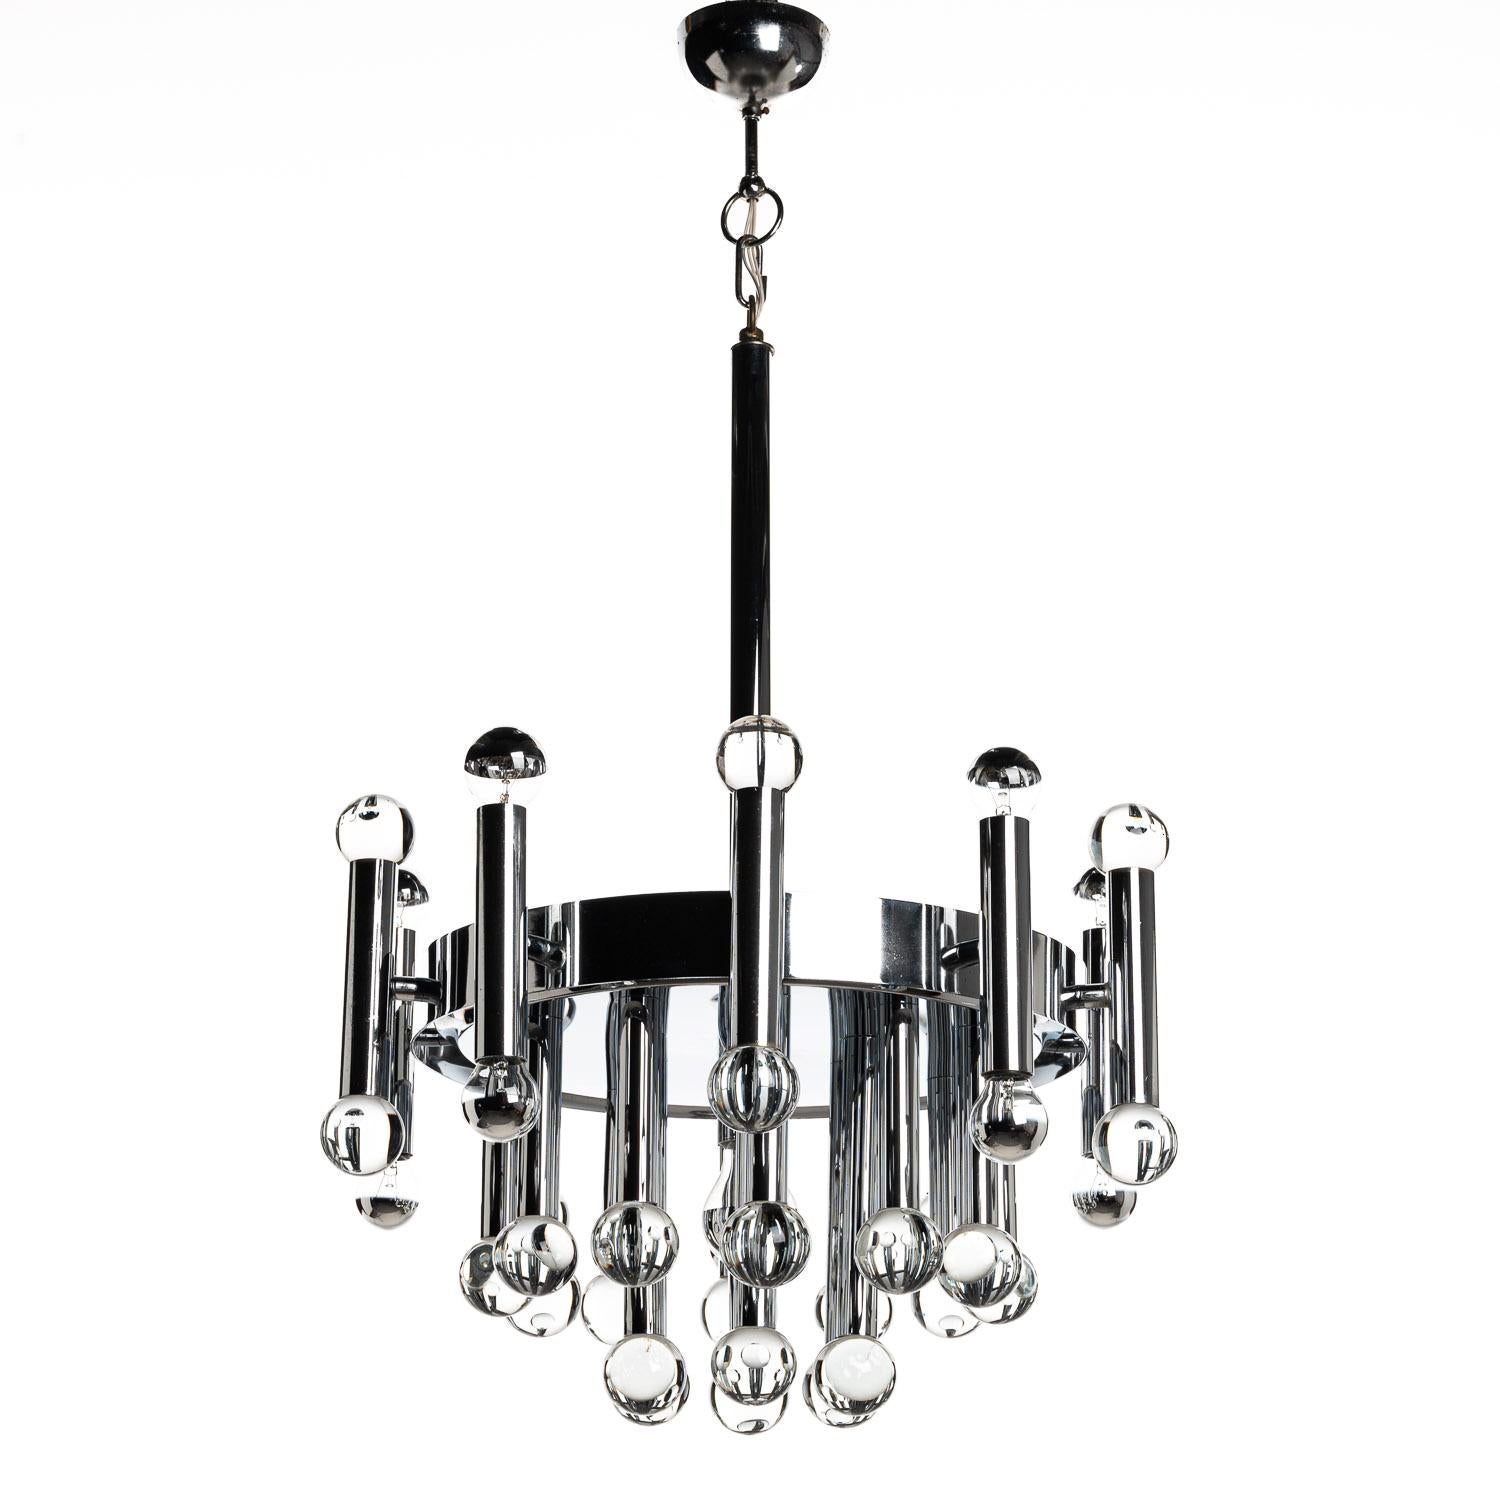 This is a stunning example of a Gaetano Sciolari pendant lamp from the 1970s. Ten E14 bulbs sitting on the top and bottom of five bars, altered between bars with glass bubbles. And one E27 bulbs radiate from a polished chrome base. The light from